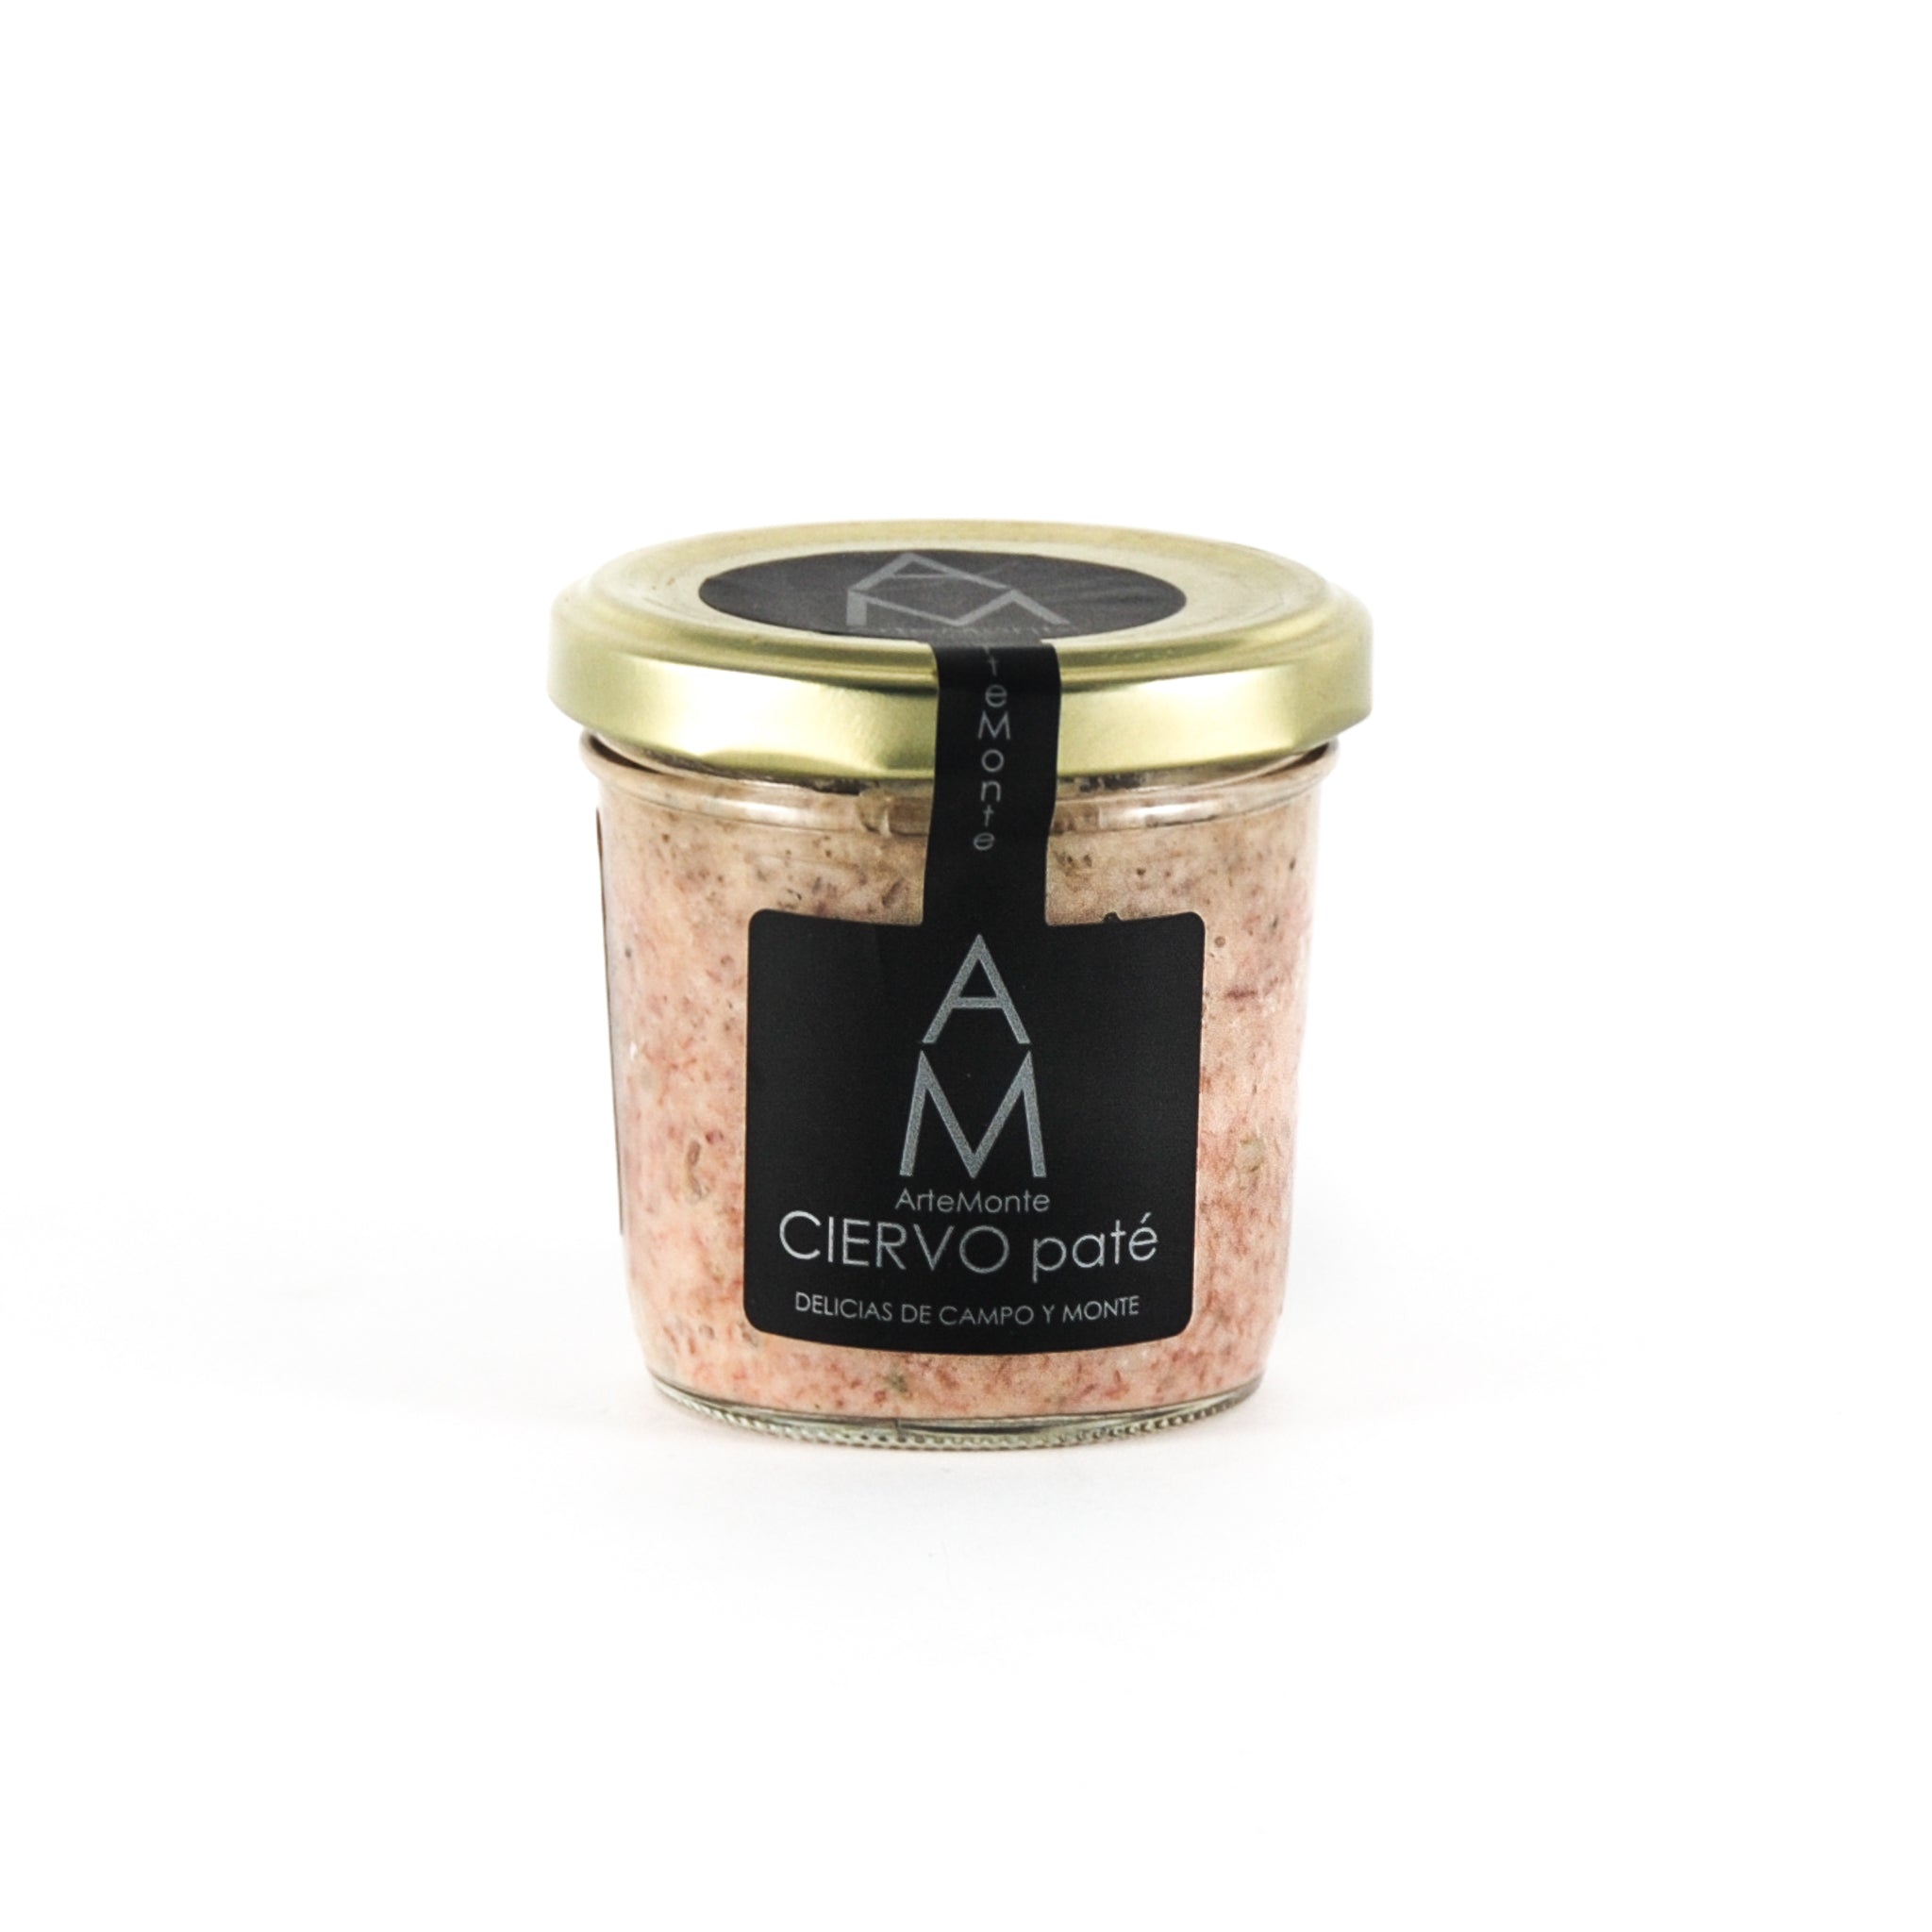 ArteMonte Venison Pate 100g Ingredients Cured Meat & Pate Spanish Food